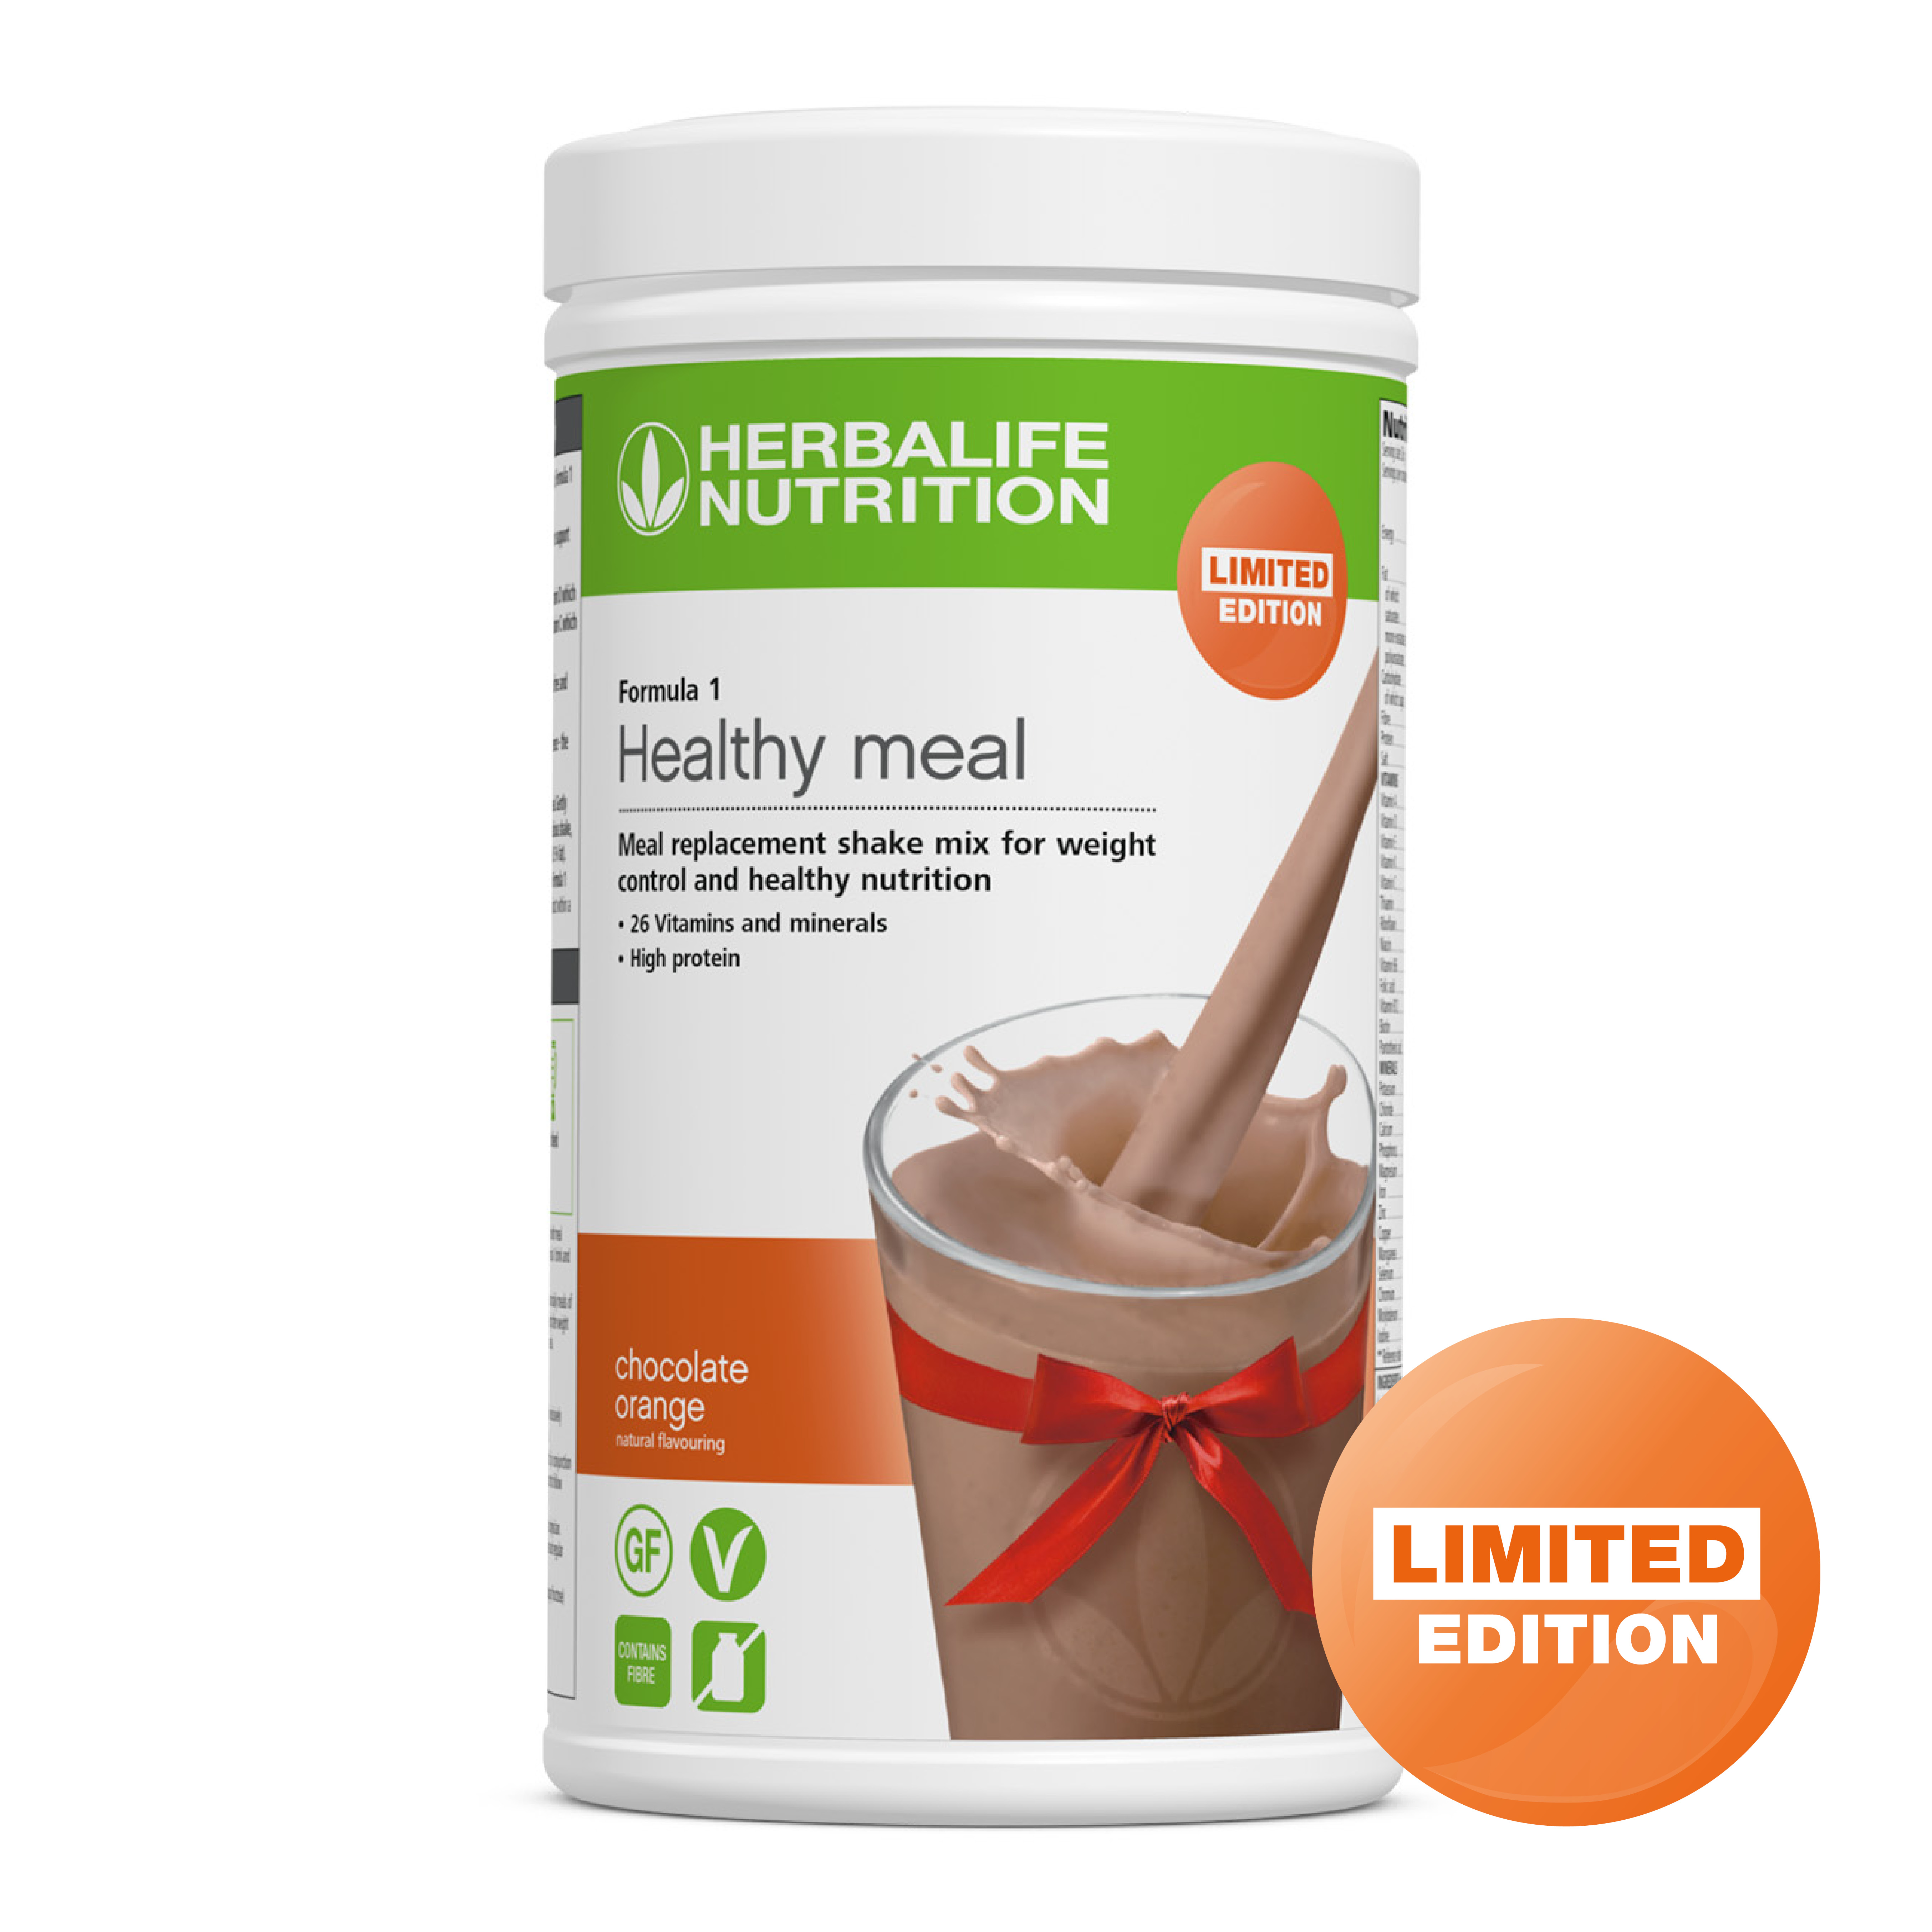 Limited edition F1 Chocolate Orange flavour. It is a healthy meal replacement shake, high in protein and balanced with vitamins and minerals plus fats.